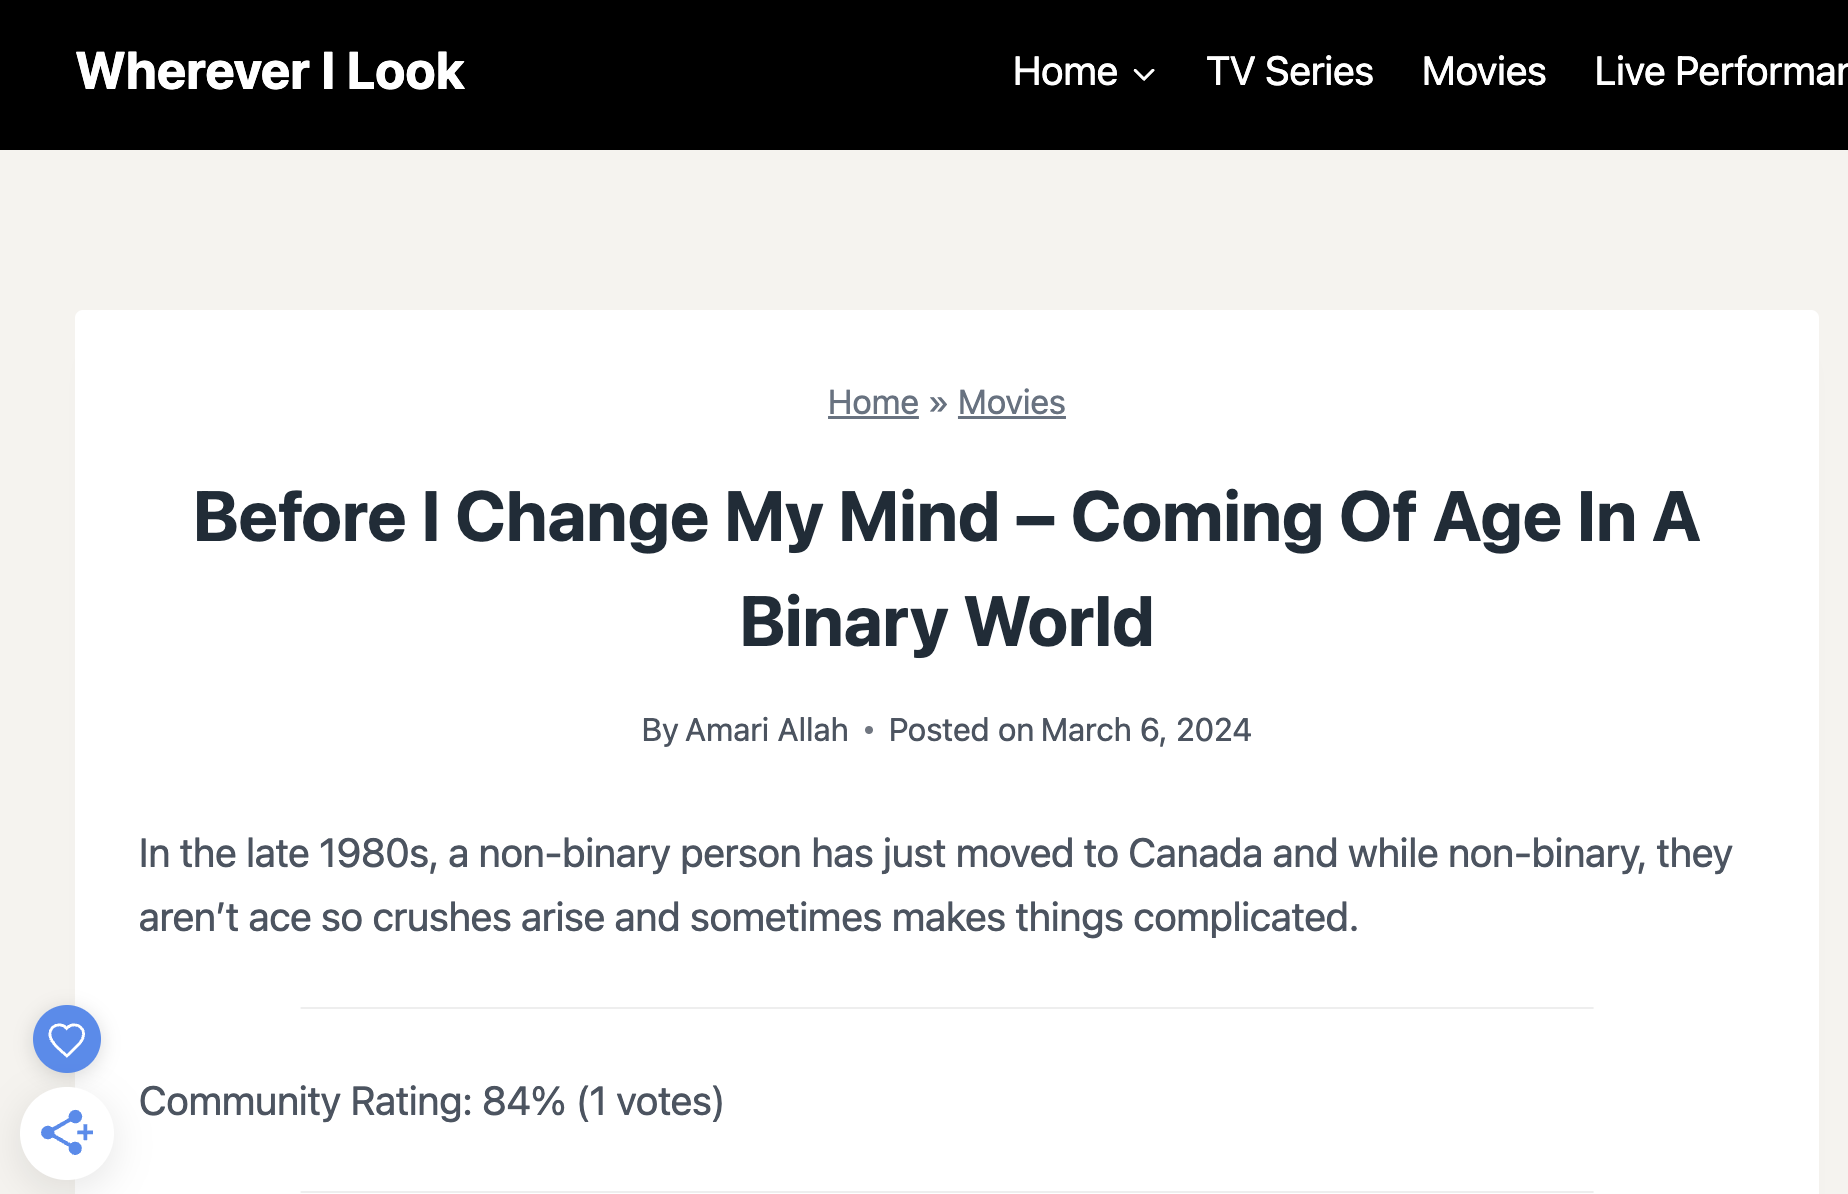 Before I Change My Mind – Coming Of Age In A Binary World